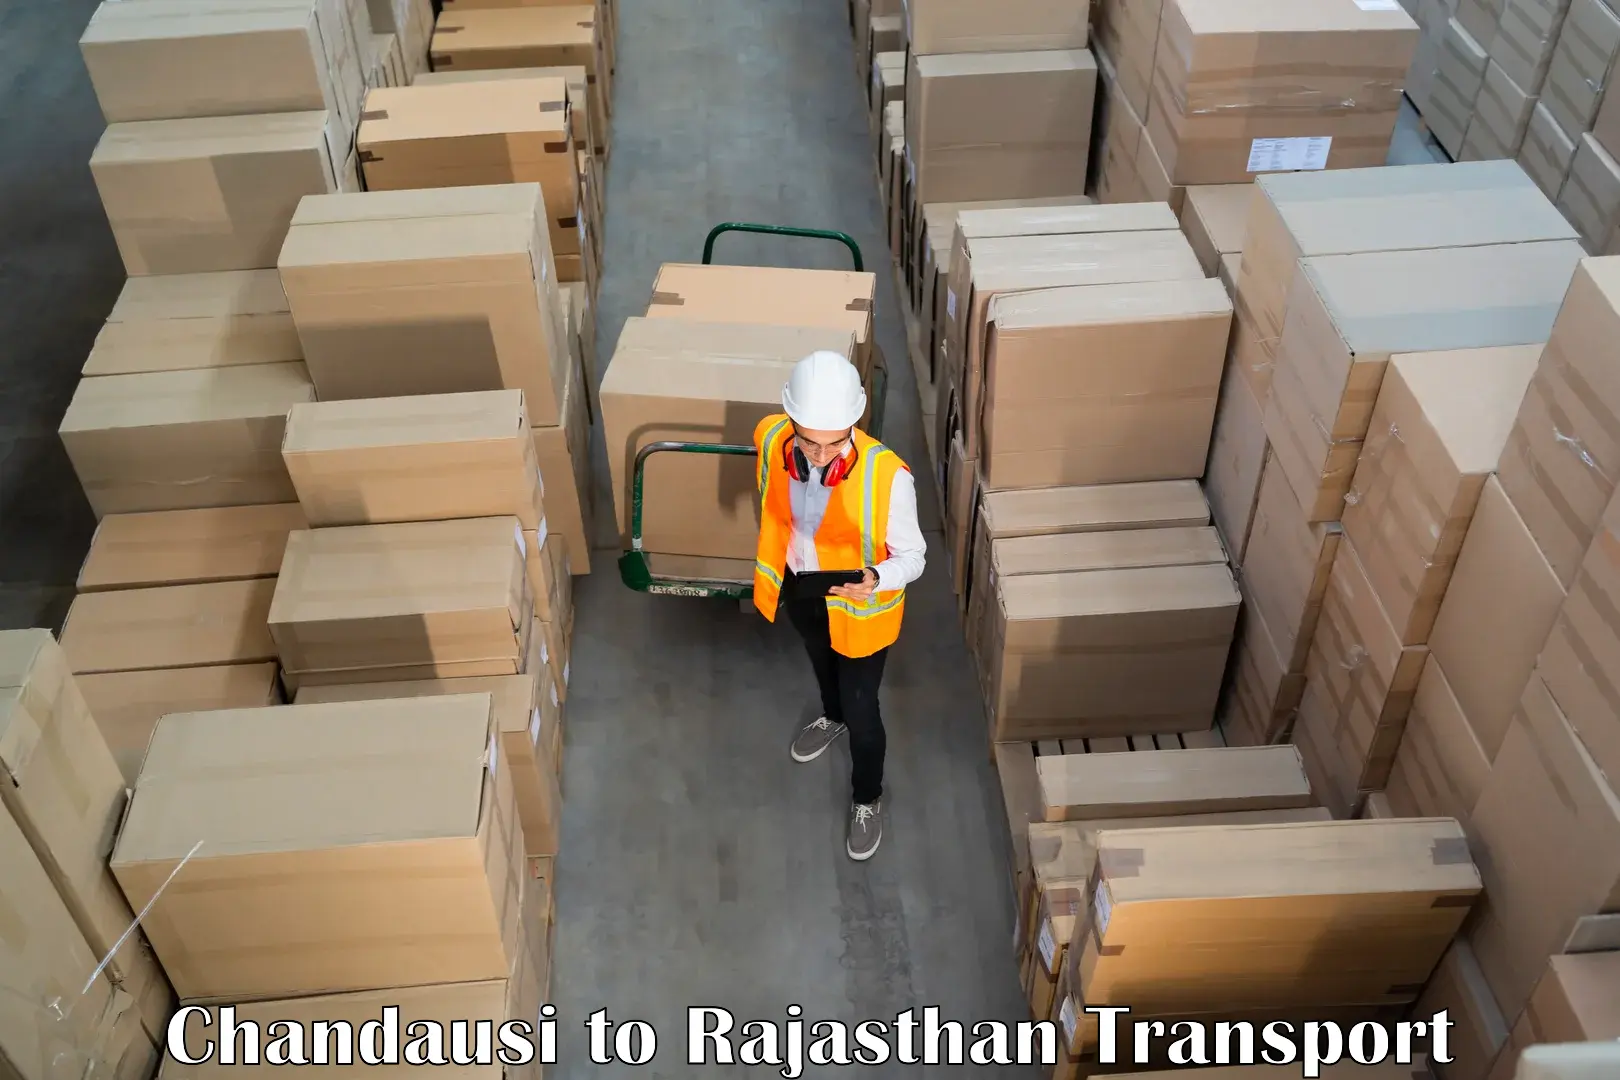 Truck transport companies in India Chandausi to Mathania